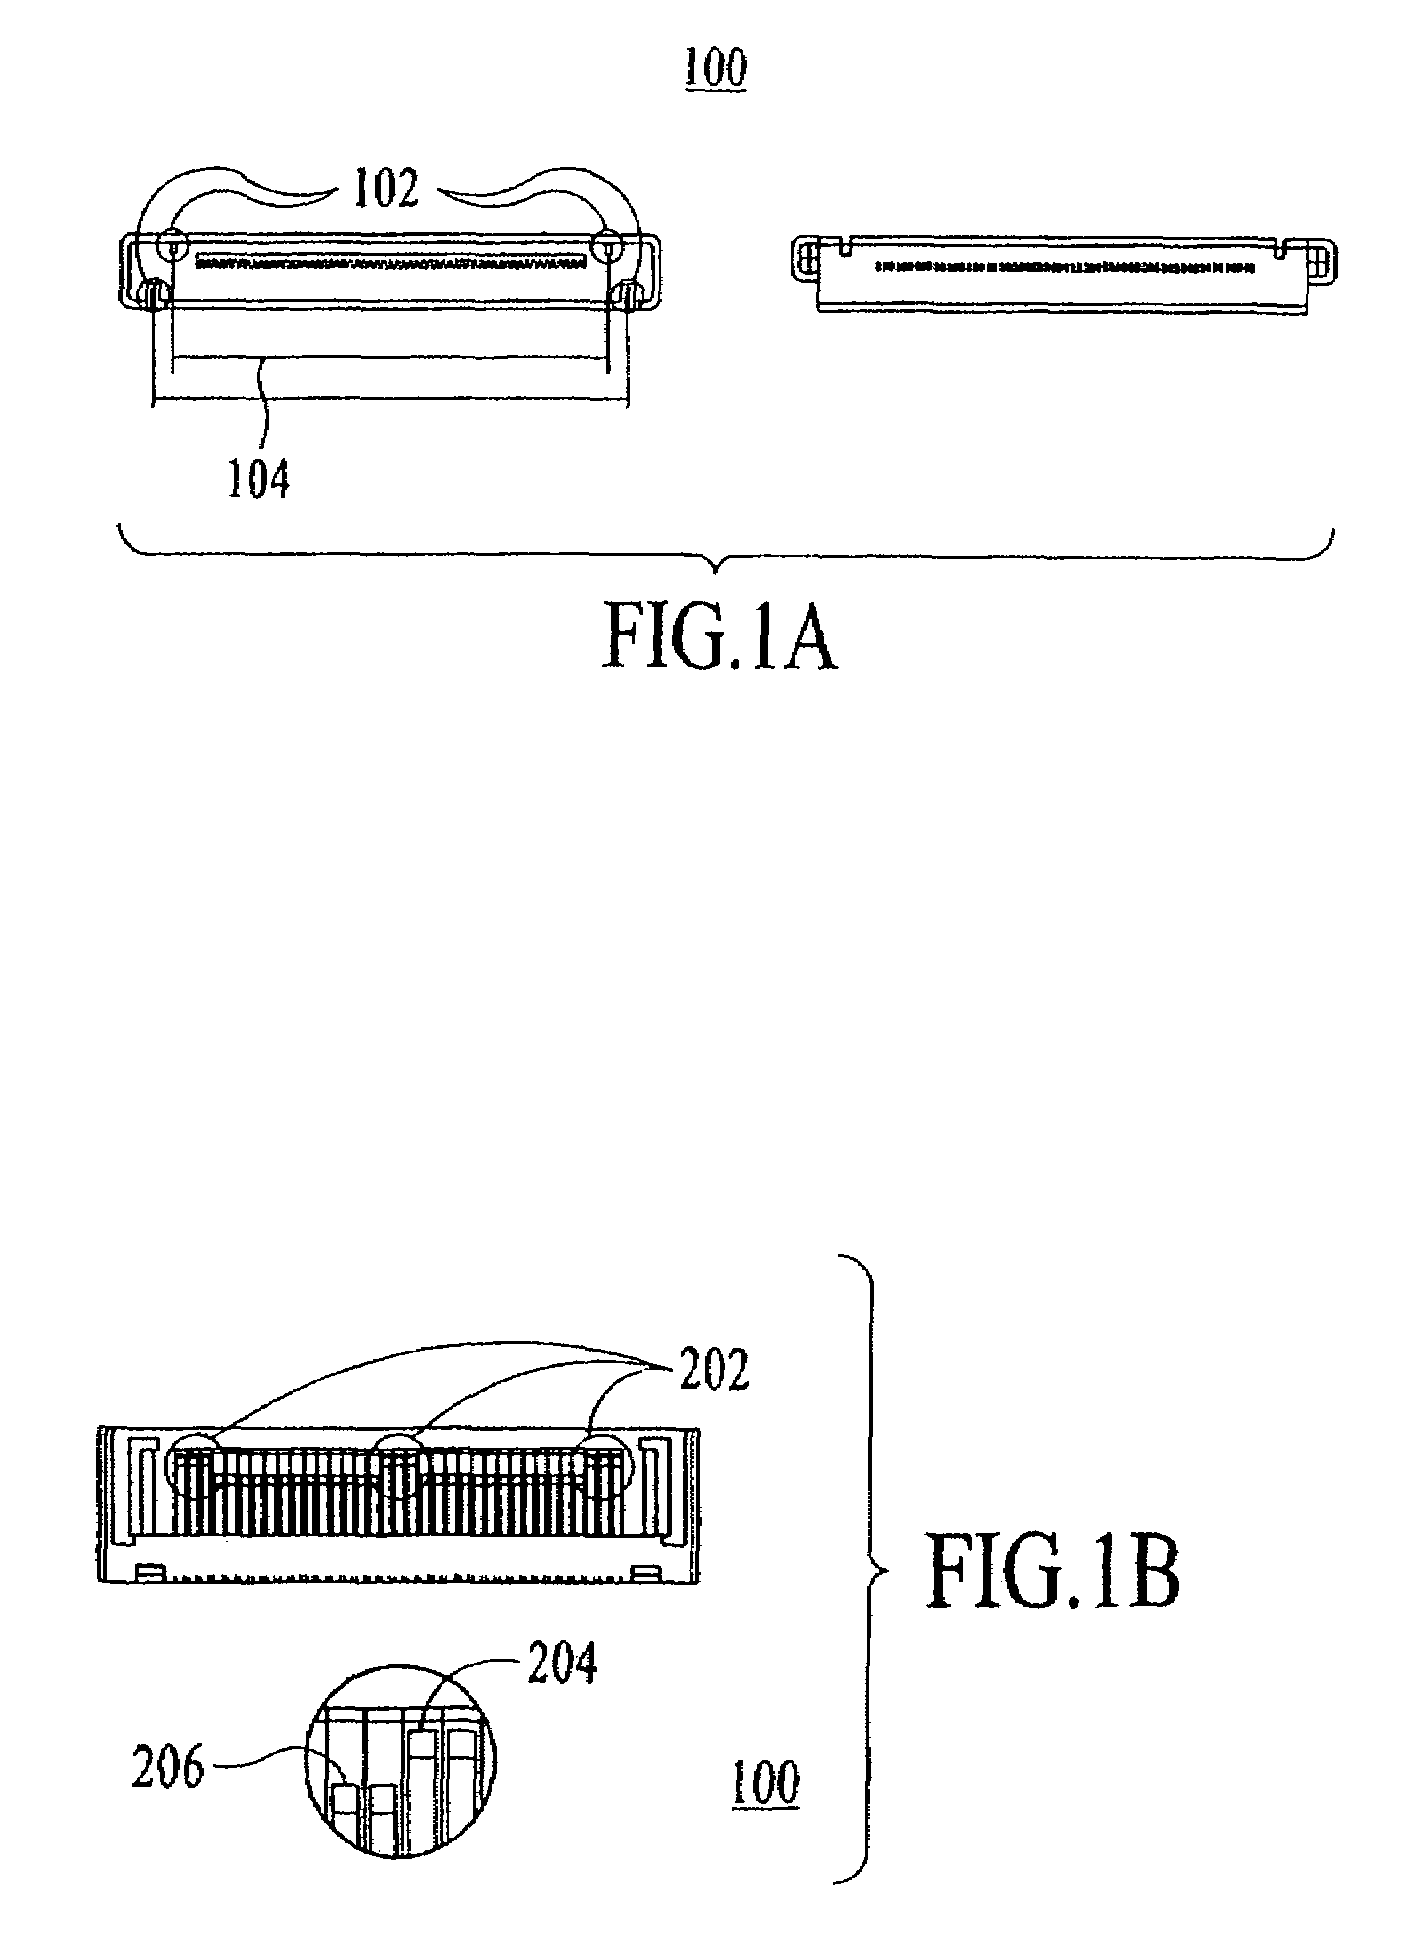 Connector interface system facilitating communication between a media player and accessories